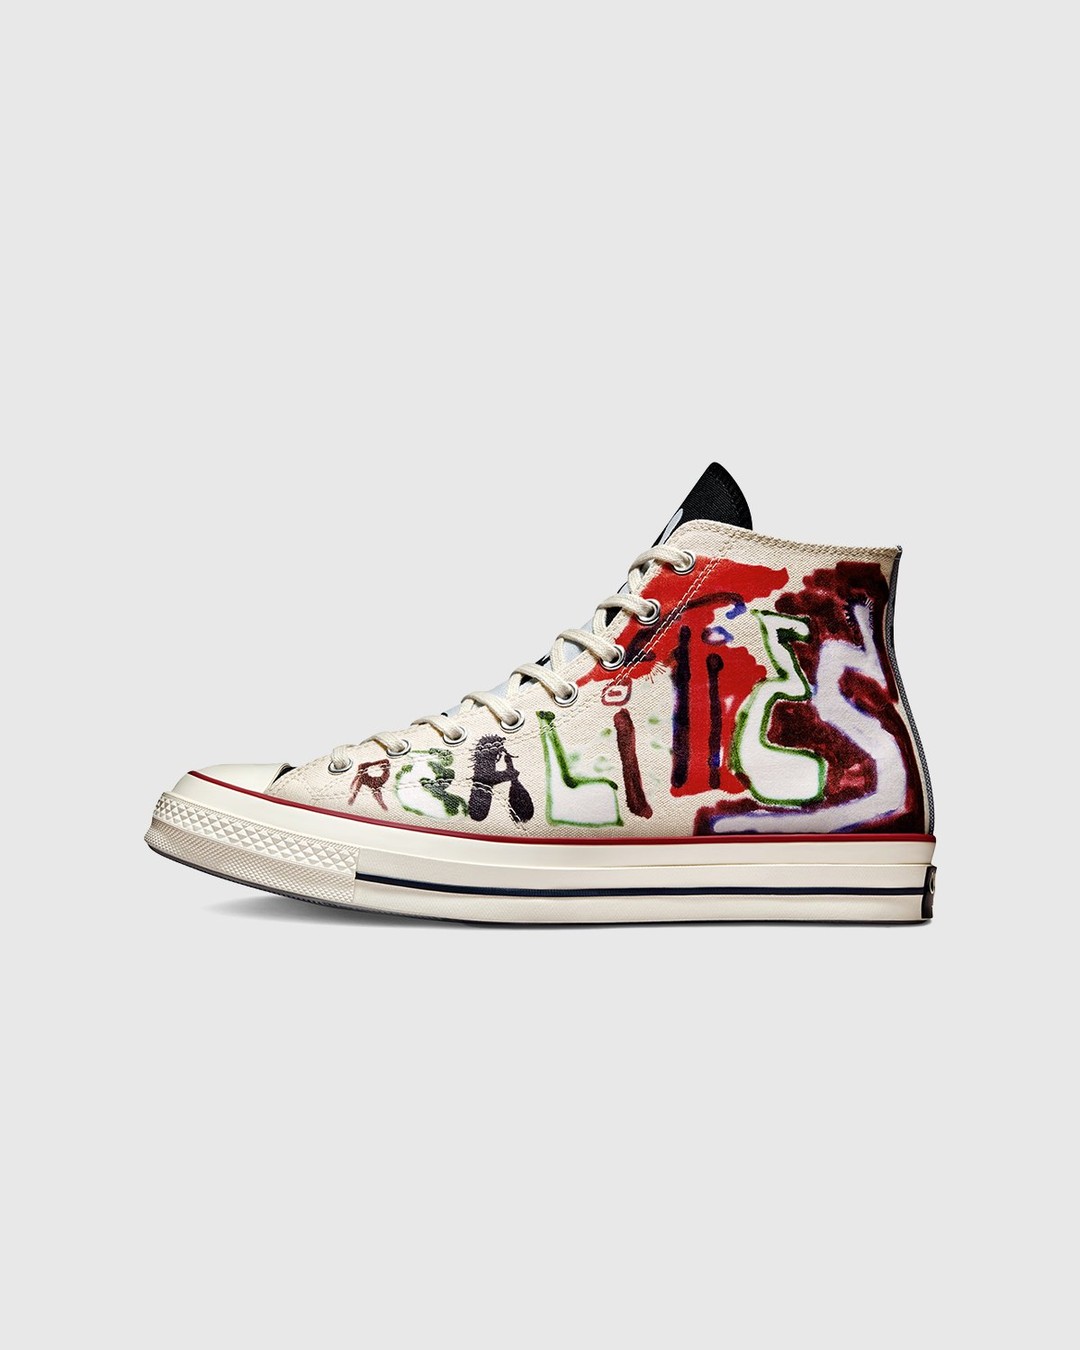 Converse x Come Tees – Chuck 70 Hi White/Multi/Egret - Sneakers - Red - Image 2